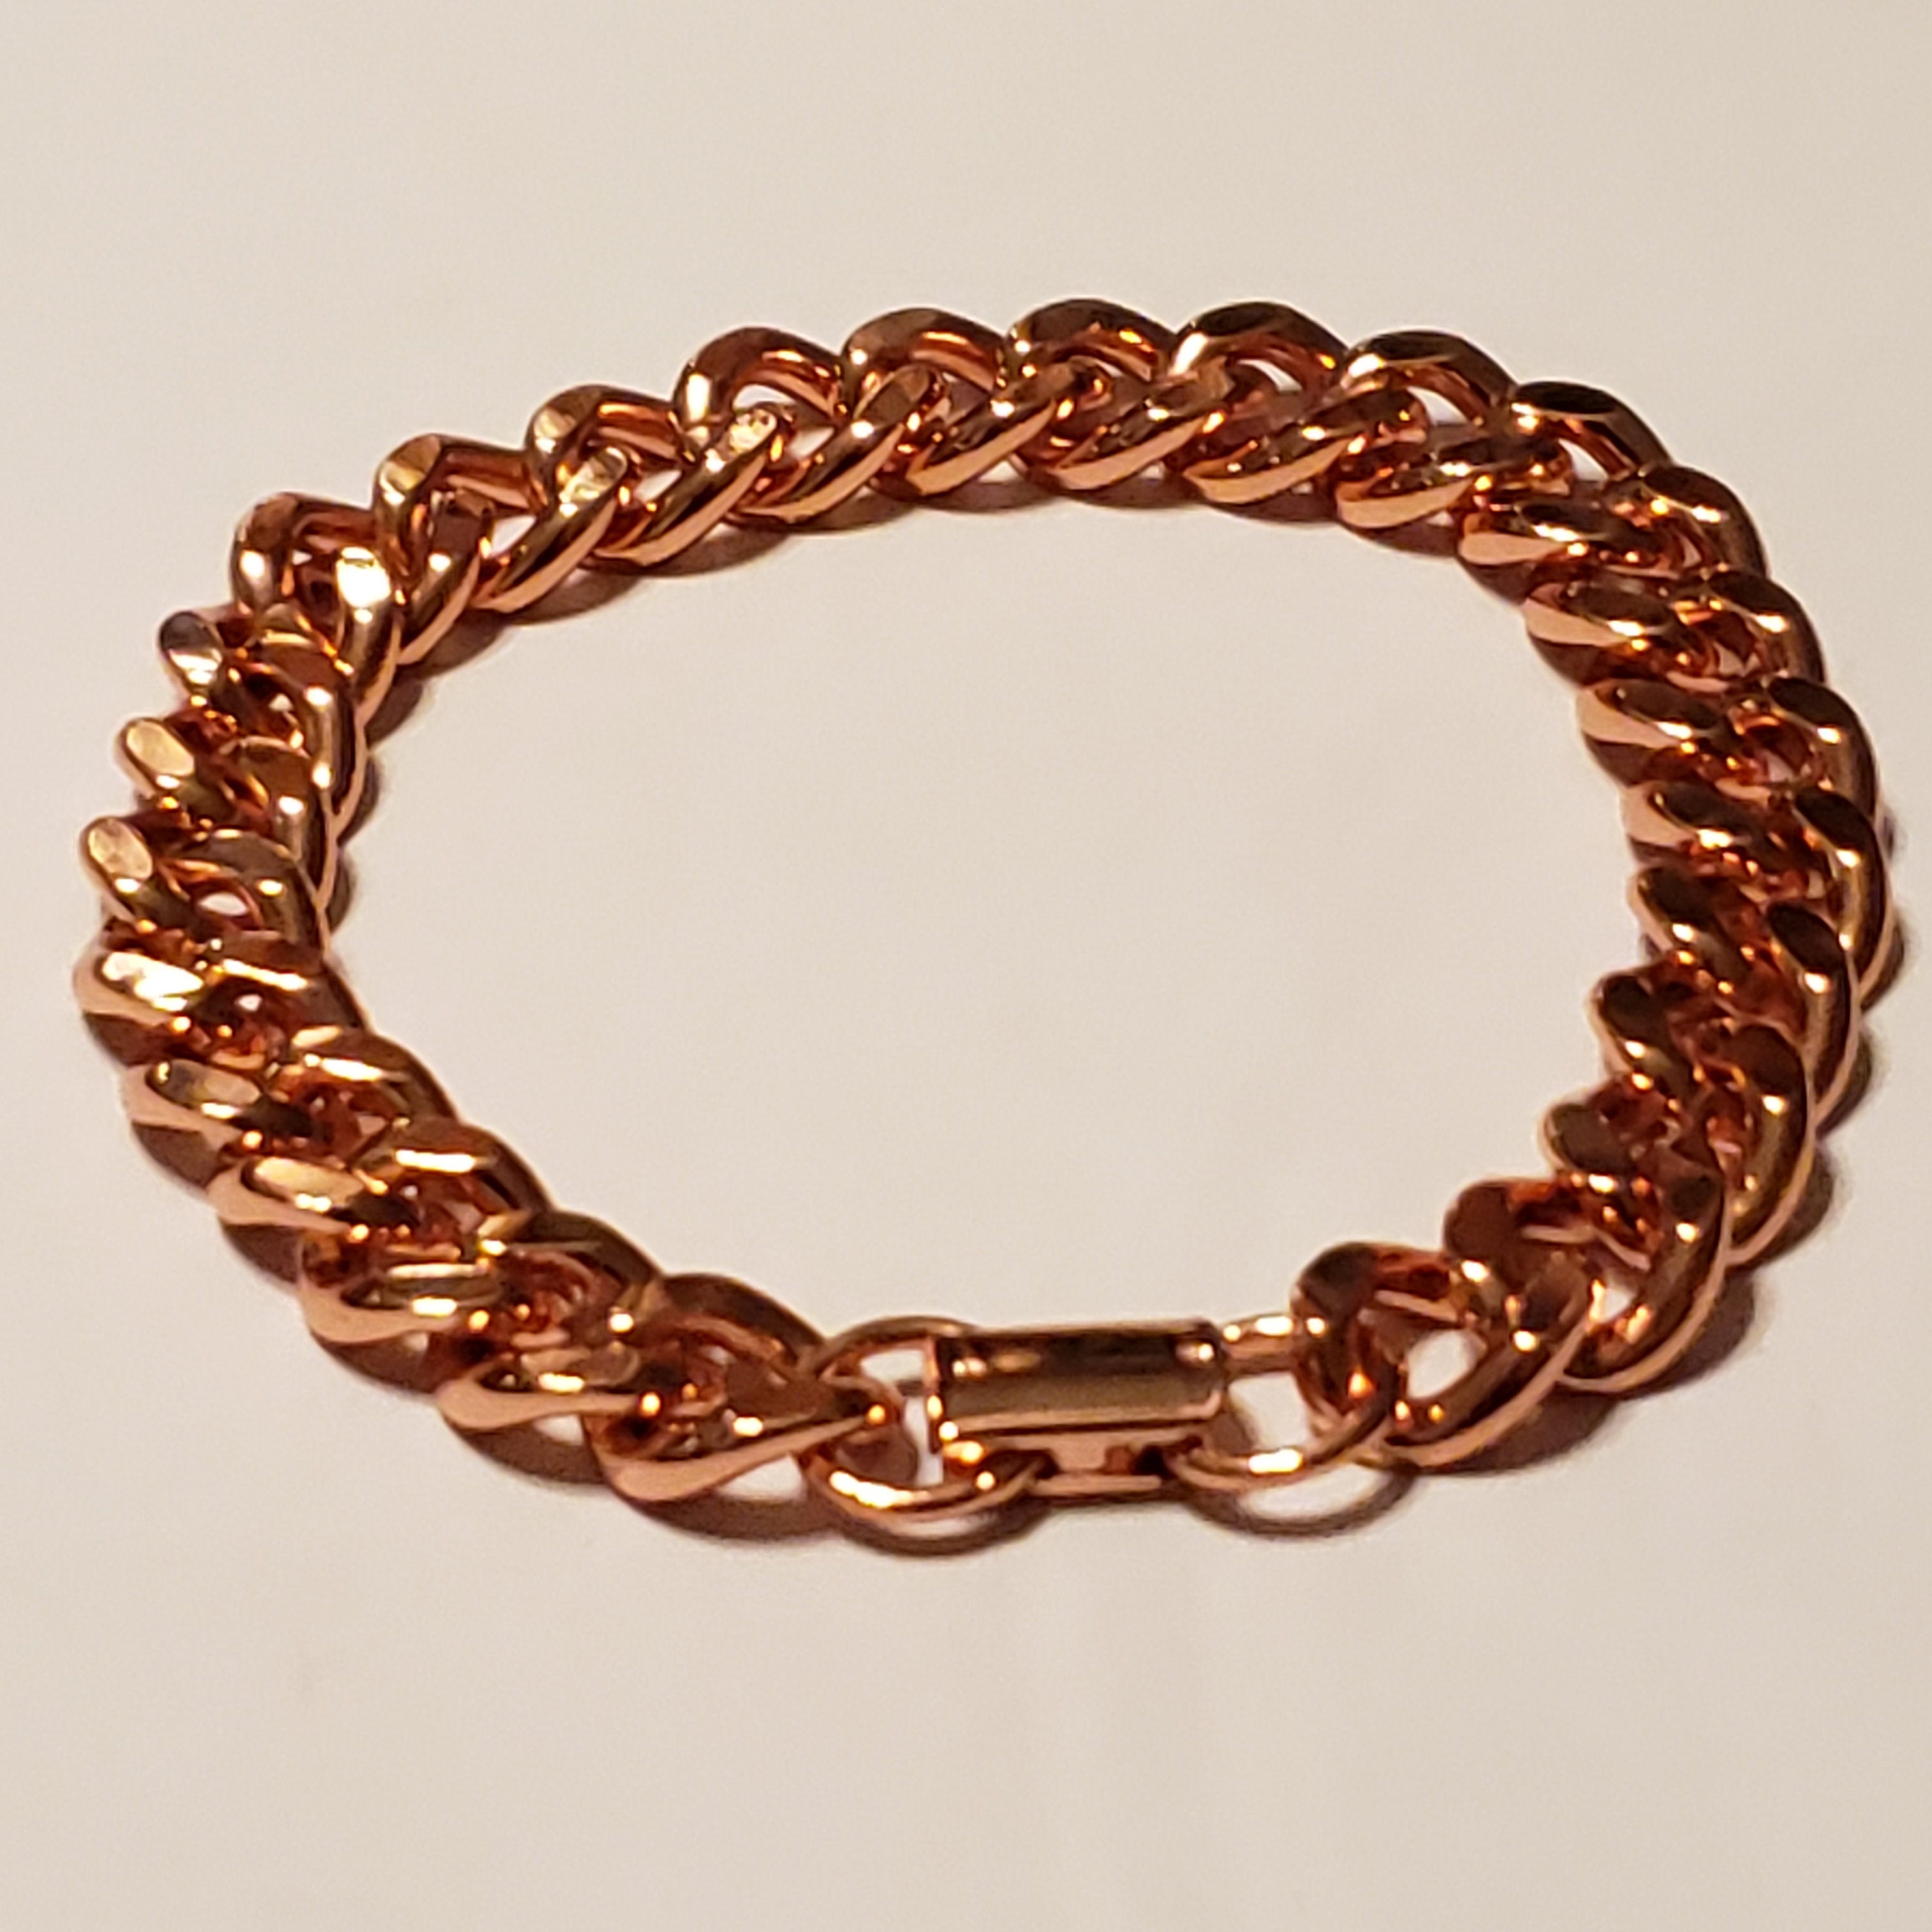 Solid Copper Super Chunky 16mm Curb Chain Bracelet B162R Men's Copper Cuban  Curb Chain Bracelet 8.5 Inch